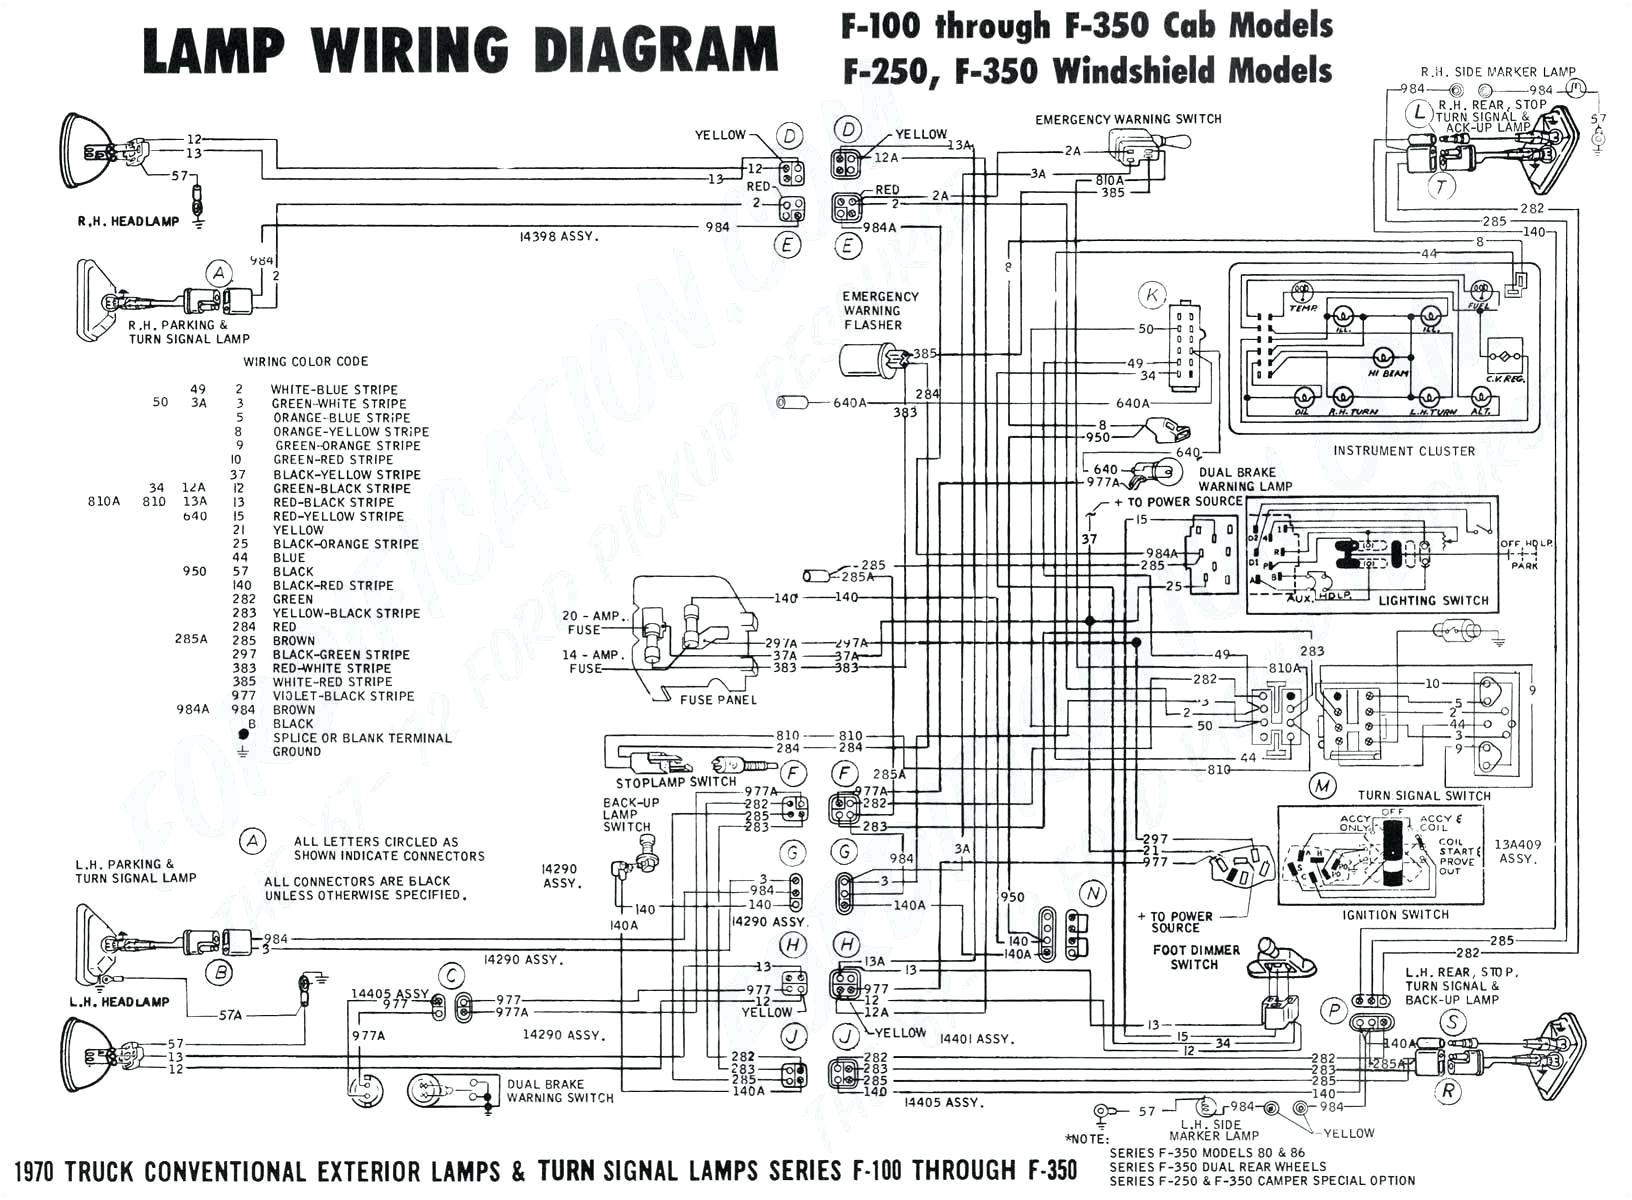 1936 chevy wiring diagram free download wiring diagram host 1936 chevy wiring diagram wiring diagram 1936